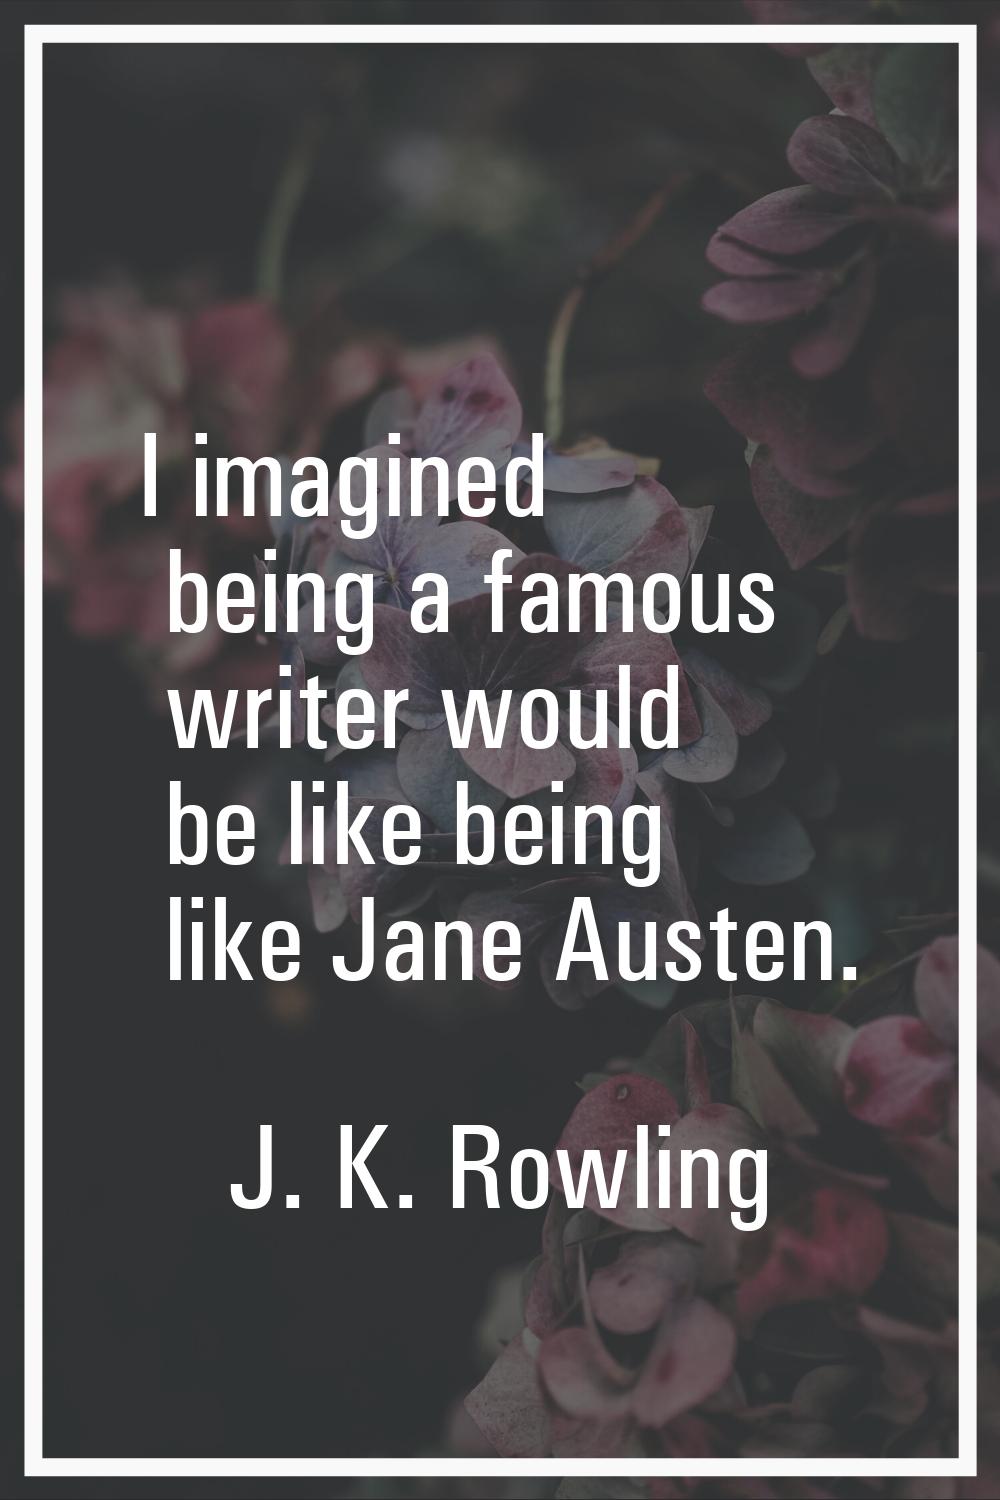 I imagined being a famous writer would be like being like Jane Austen.